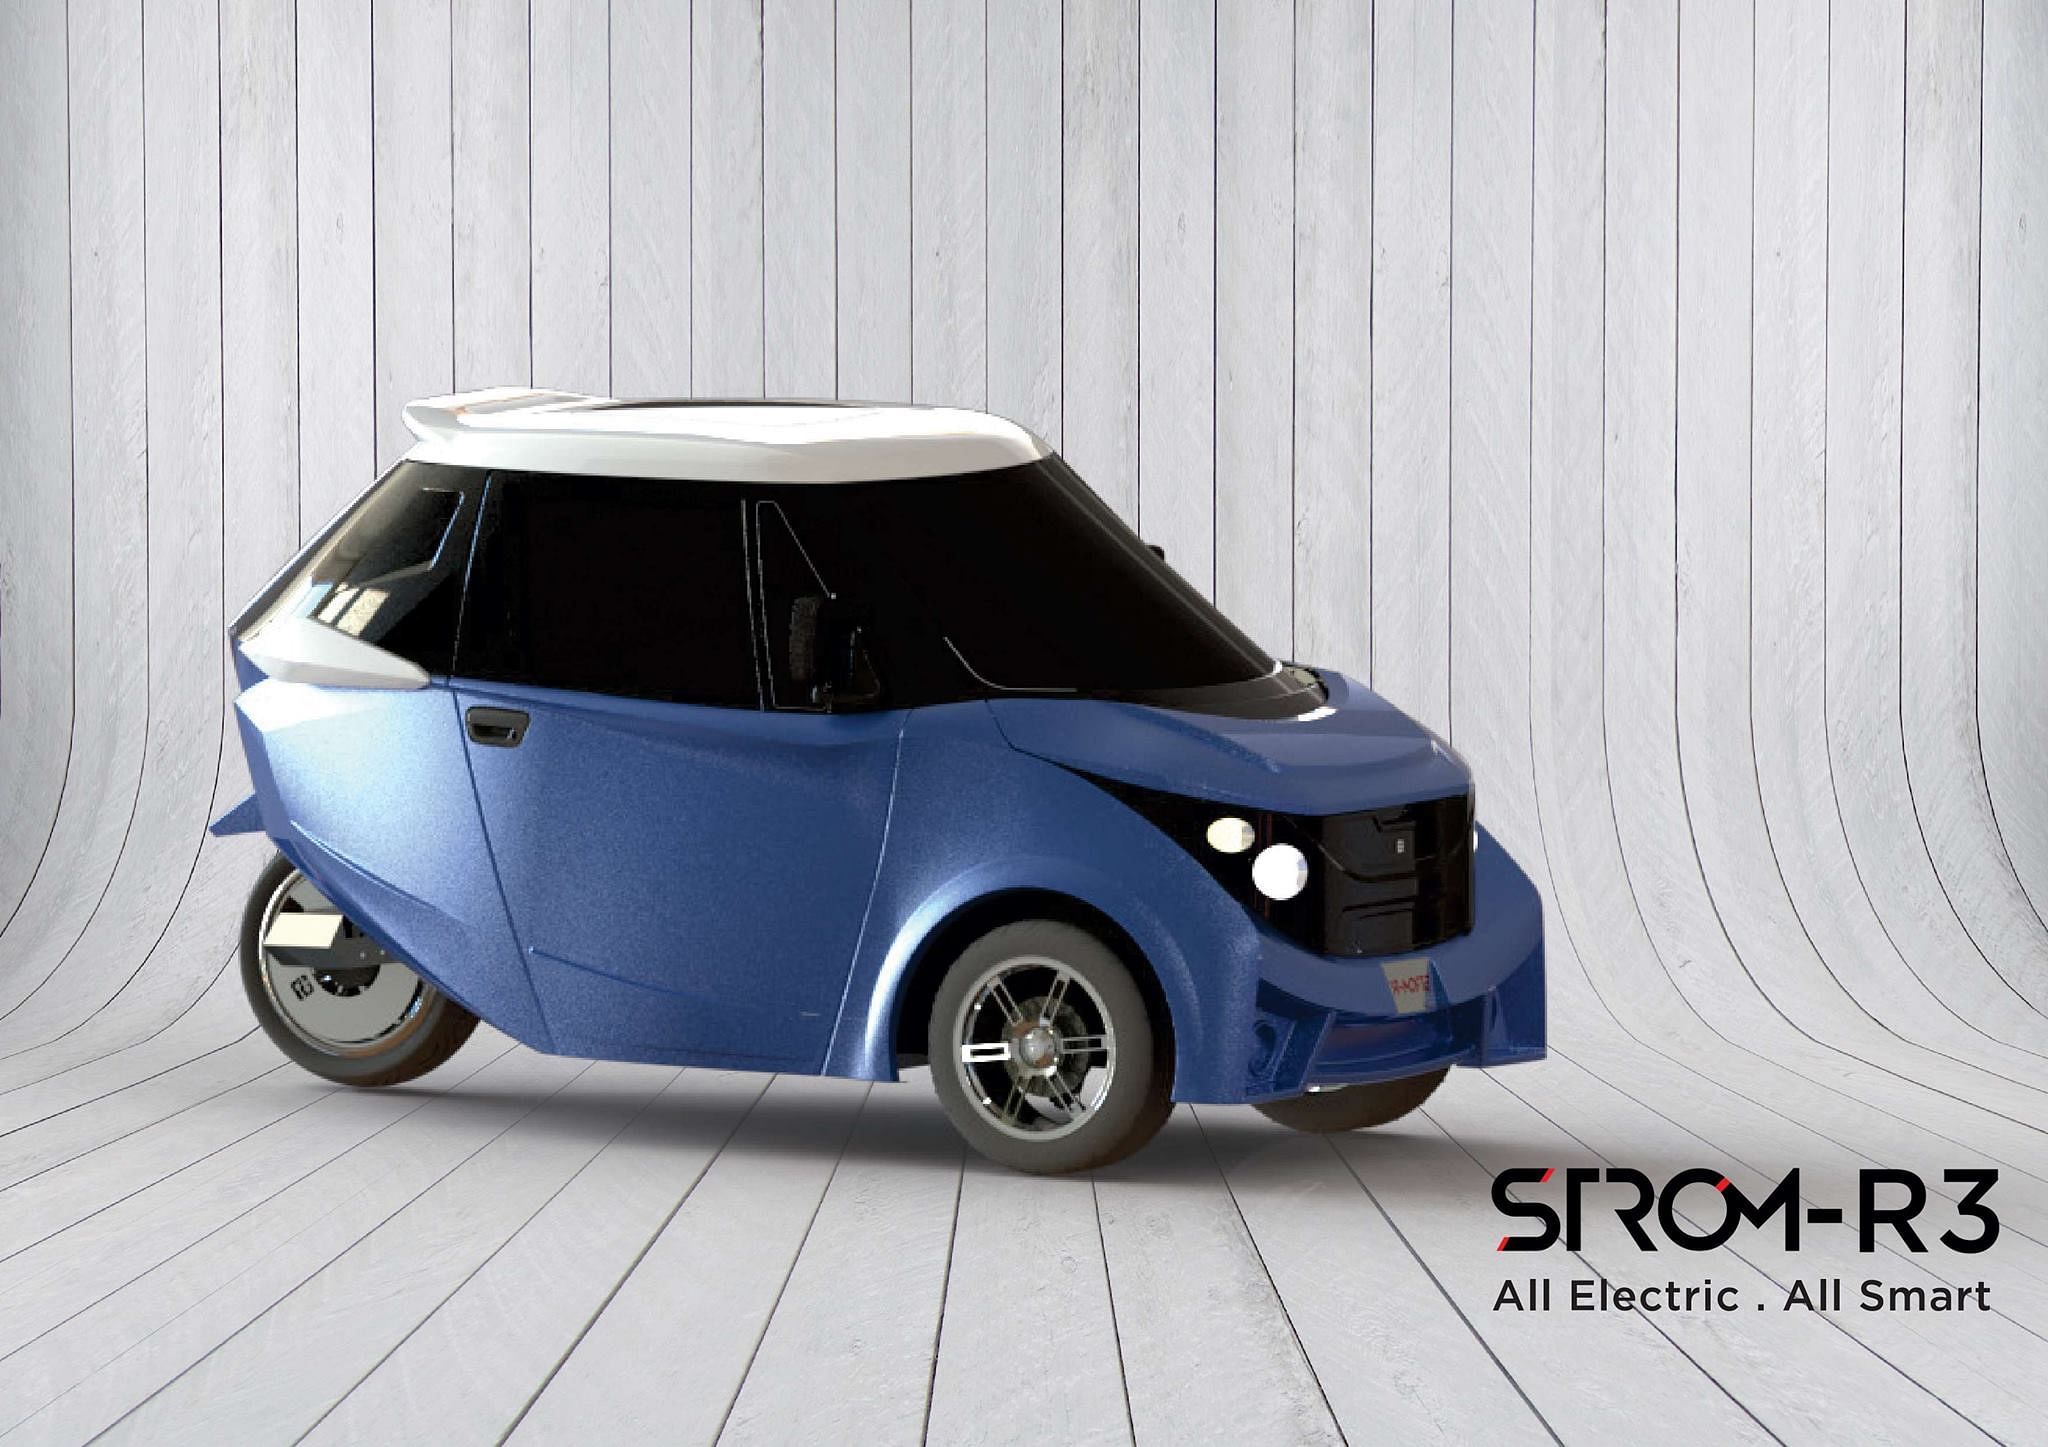 Strom R-3 - affordable electric car in India